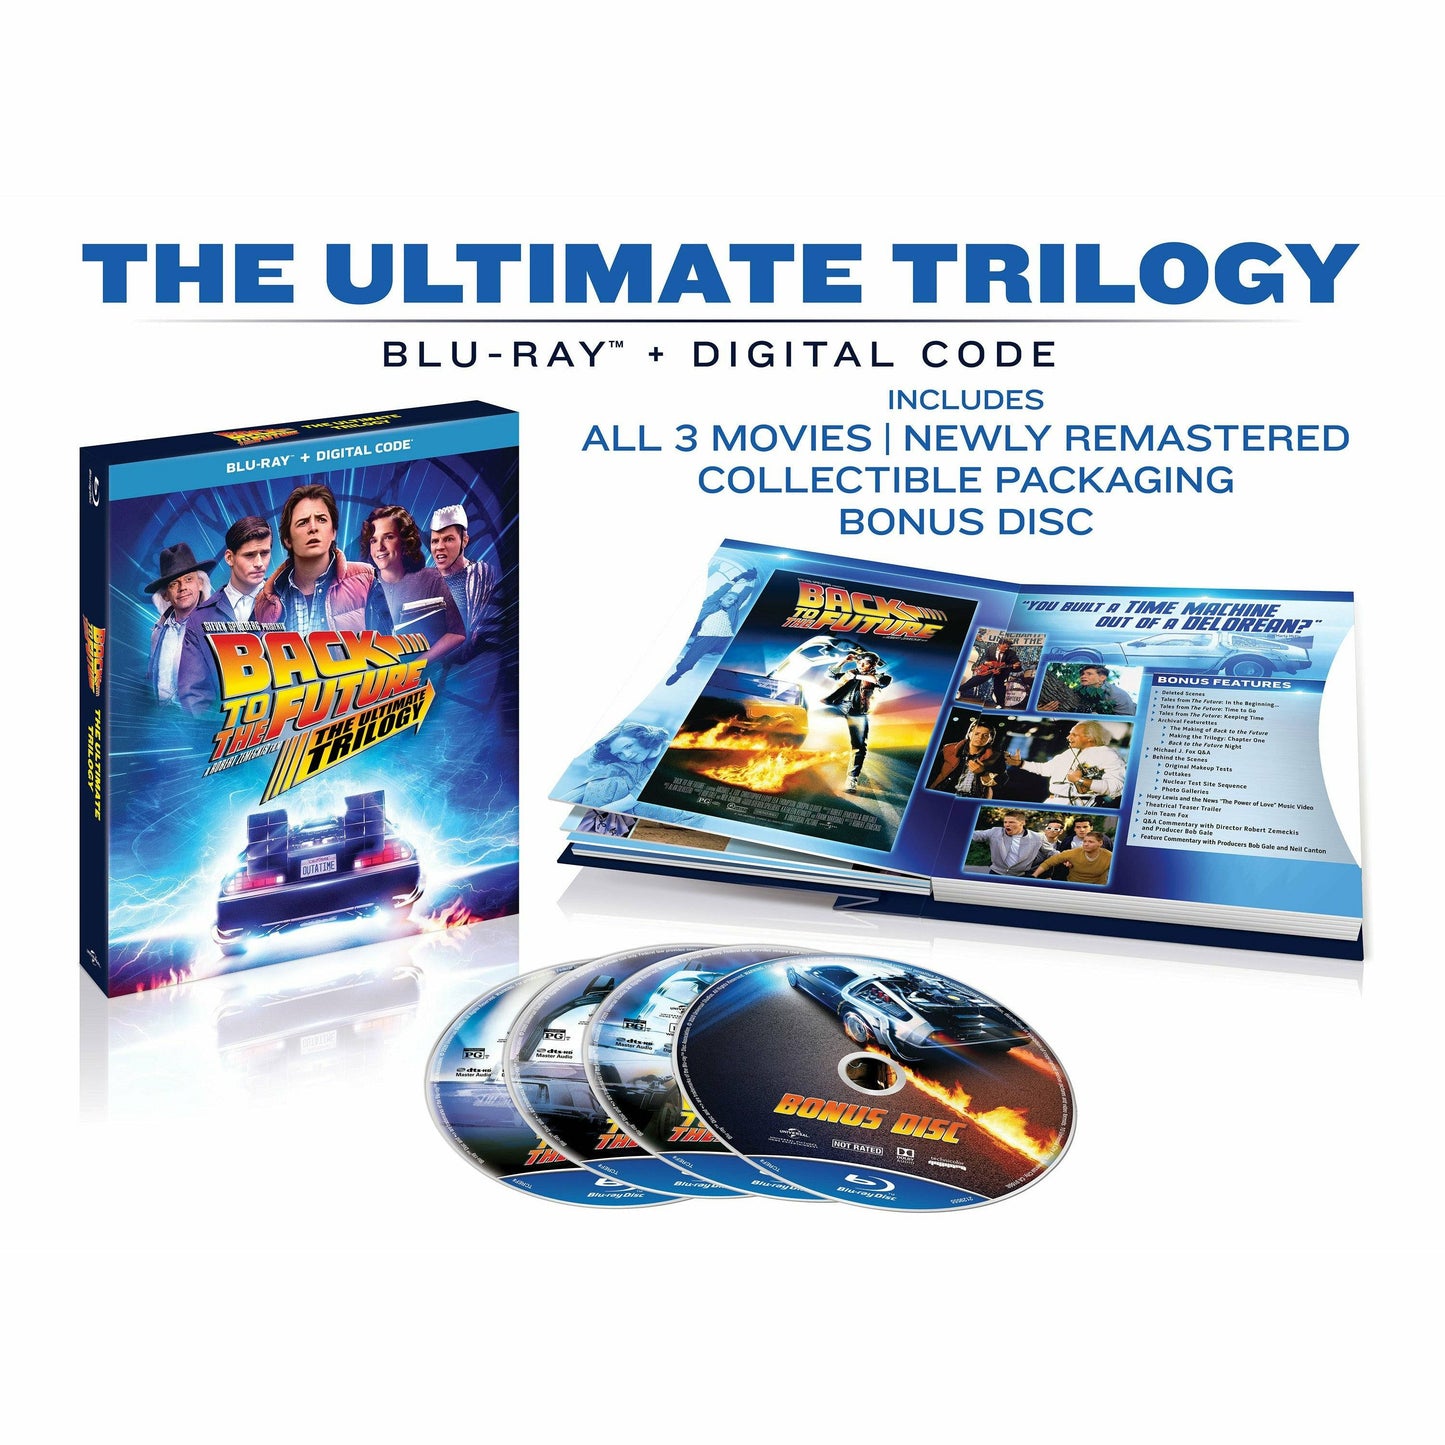 Back to the Future: The Ultimate Trilogy (Blu-ray™ + Digital Code) [2020]